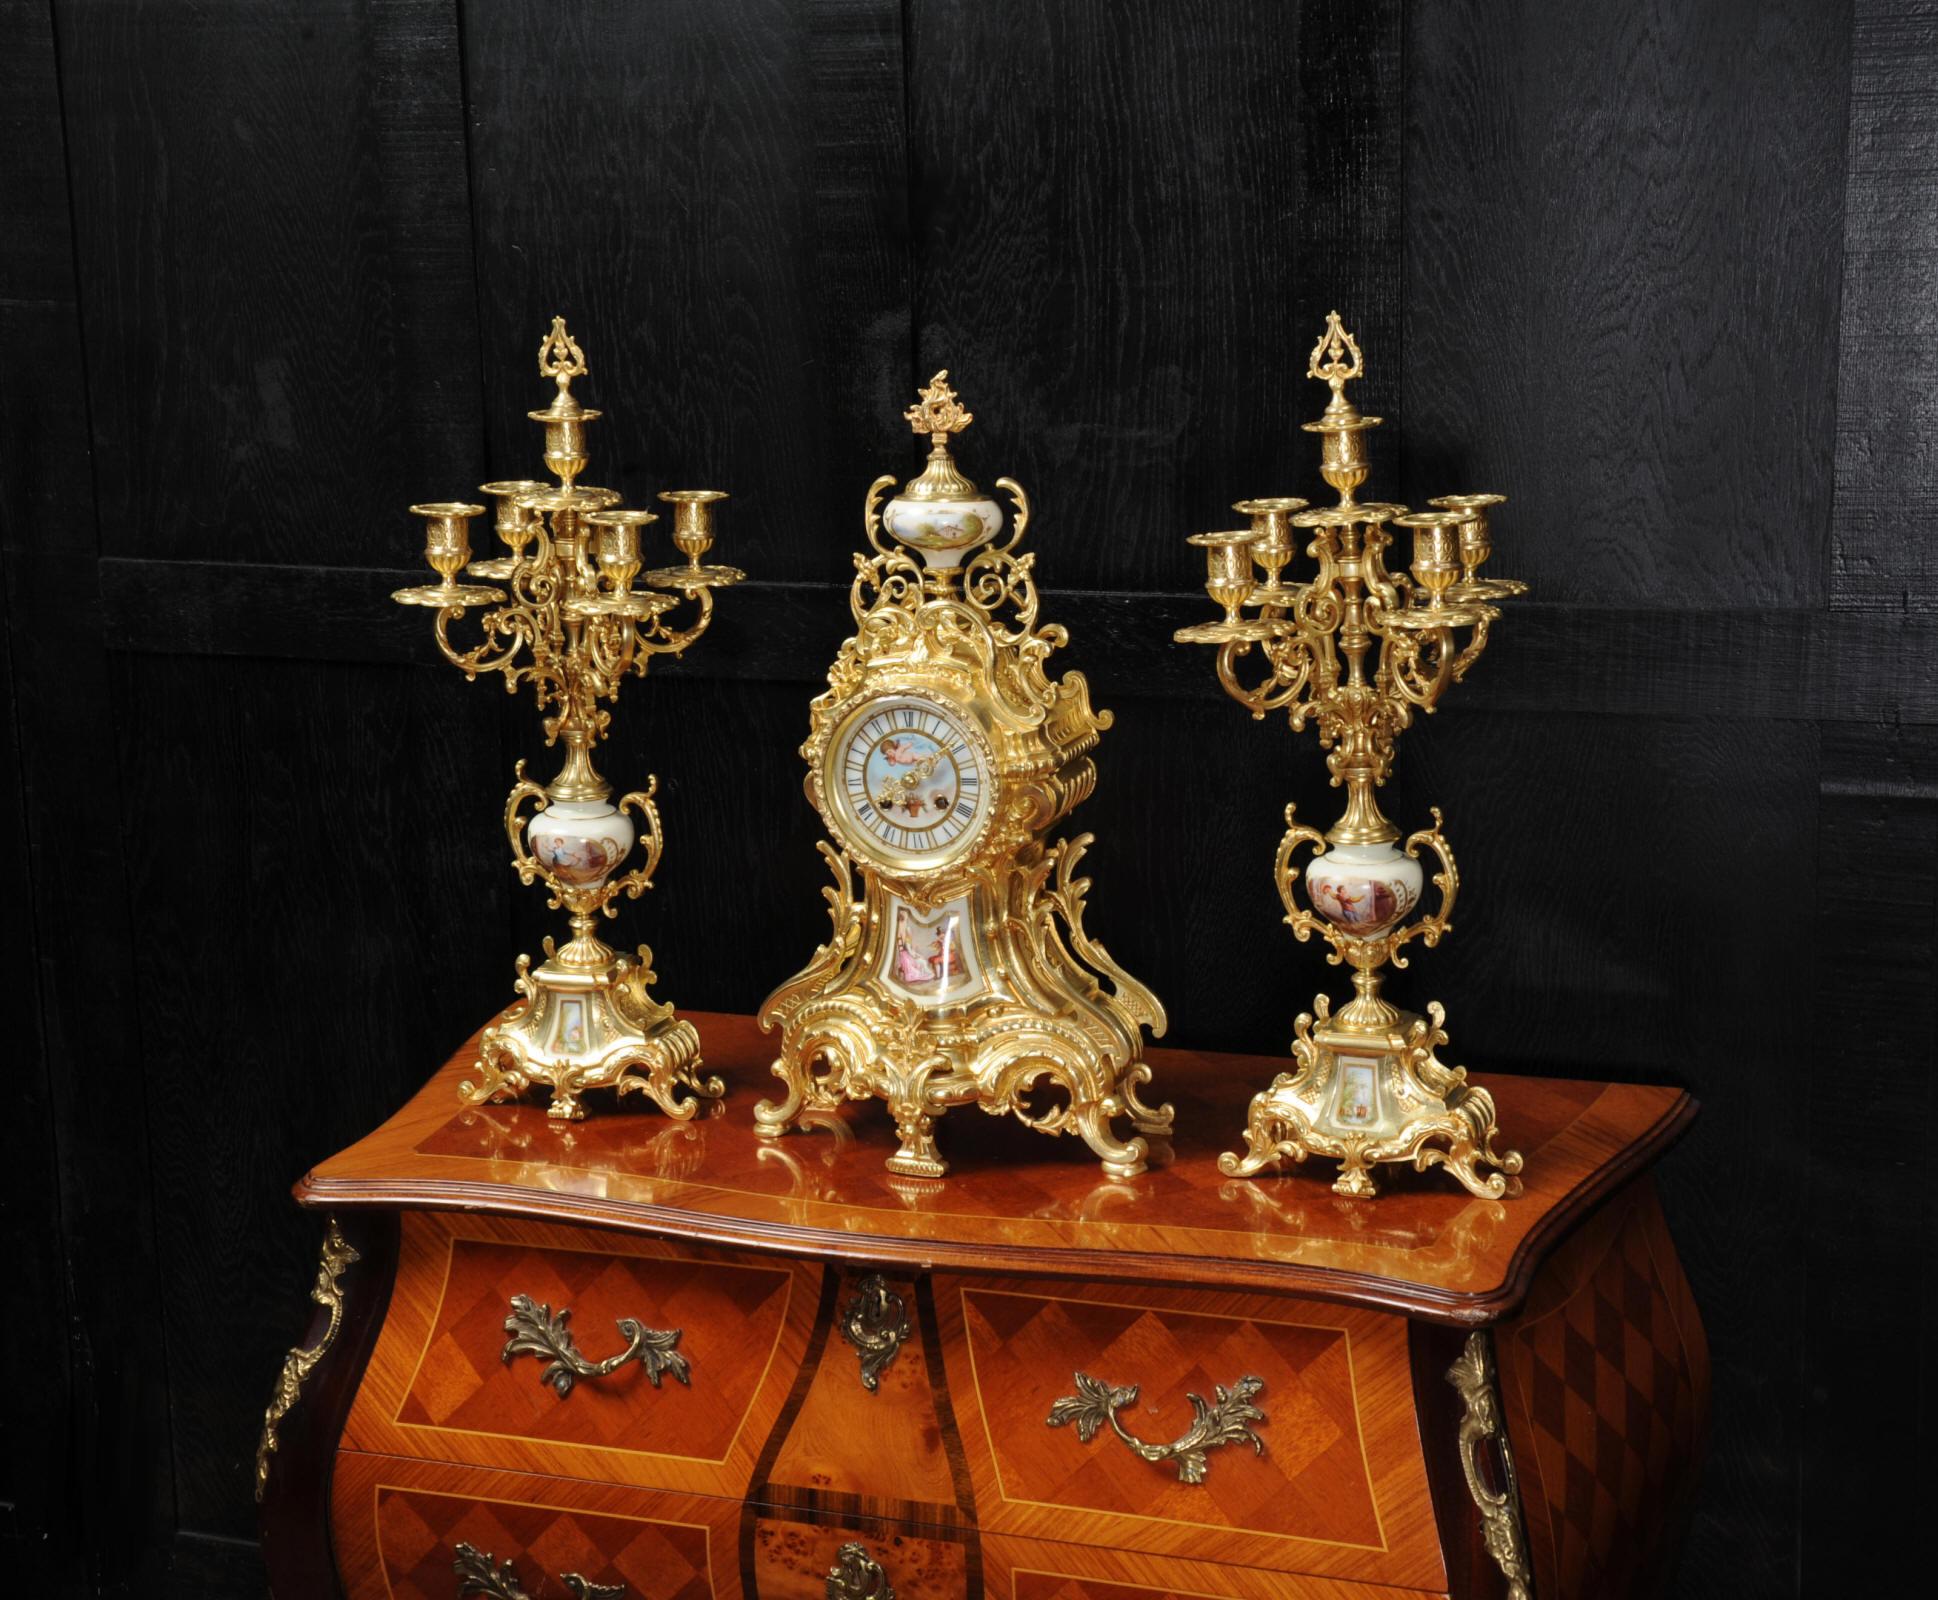 A large and beautiful antique French Rococo clock set circa 1900. Beautifully made in finely gilded bronze and mounted with exquisite Sèvres style porcelain. Porcelain has a white ground with panels delicately painted with scenes. The urn shows an